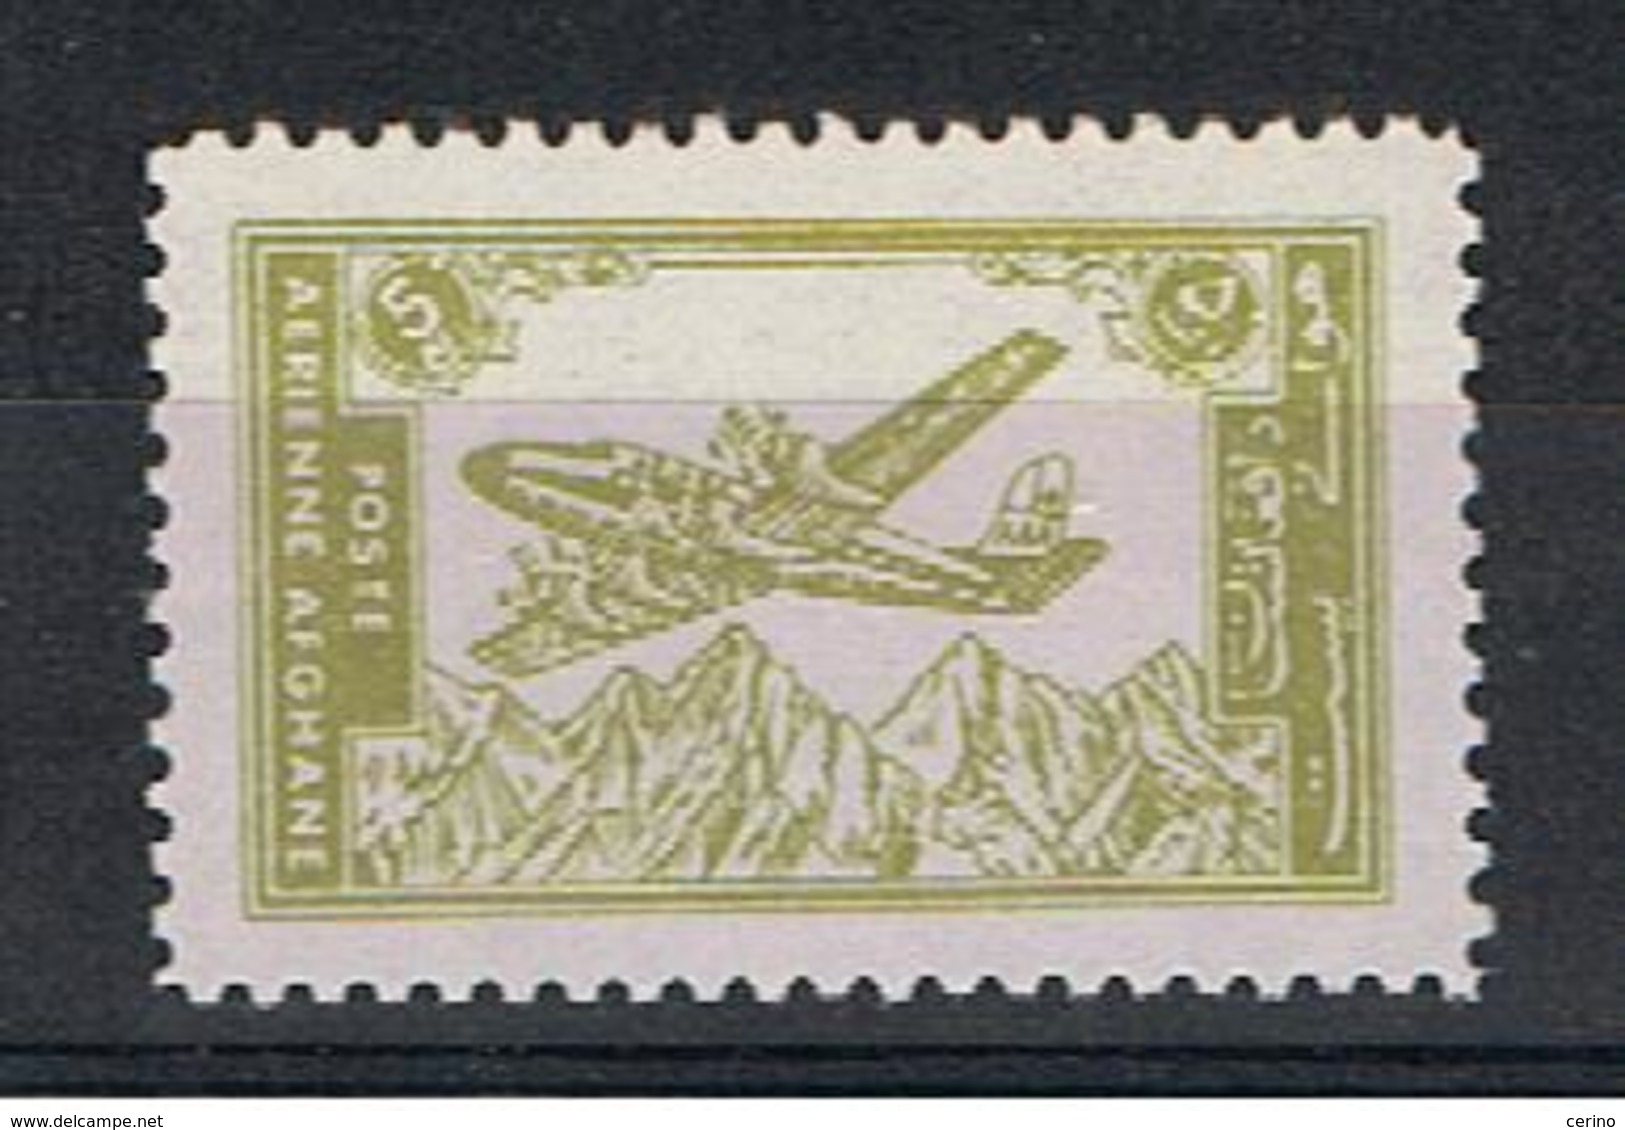 AFGHANISTAN:  1960/64  P.A. AEREO  IN  VOLO  -  5 Afg. OLIVA  CHIARO  N. -  YV./TELL. 16 A - Afghanistan